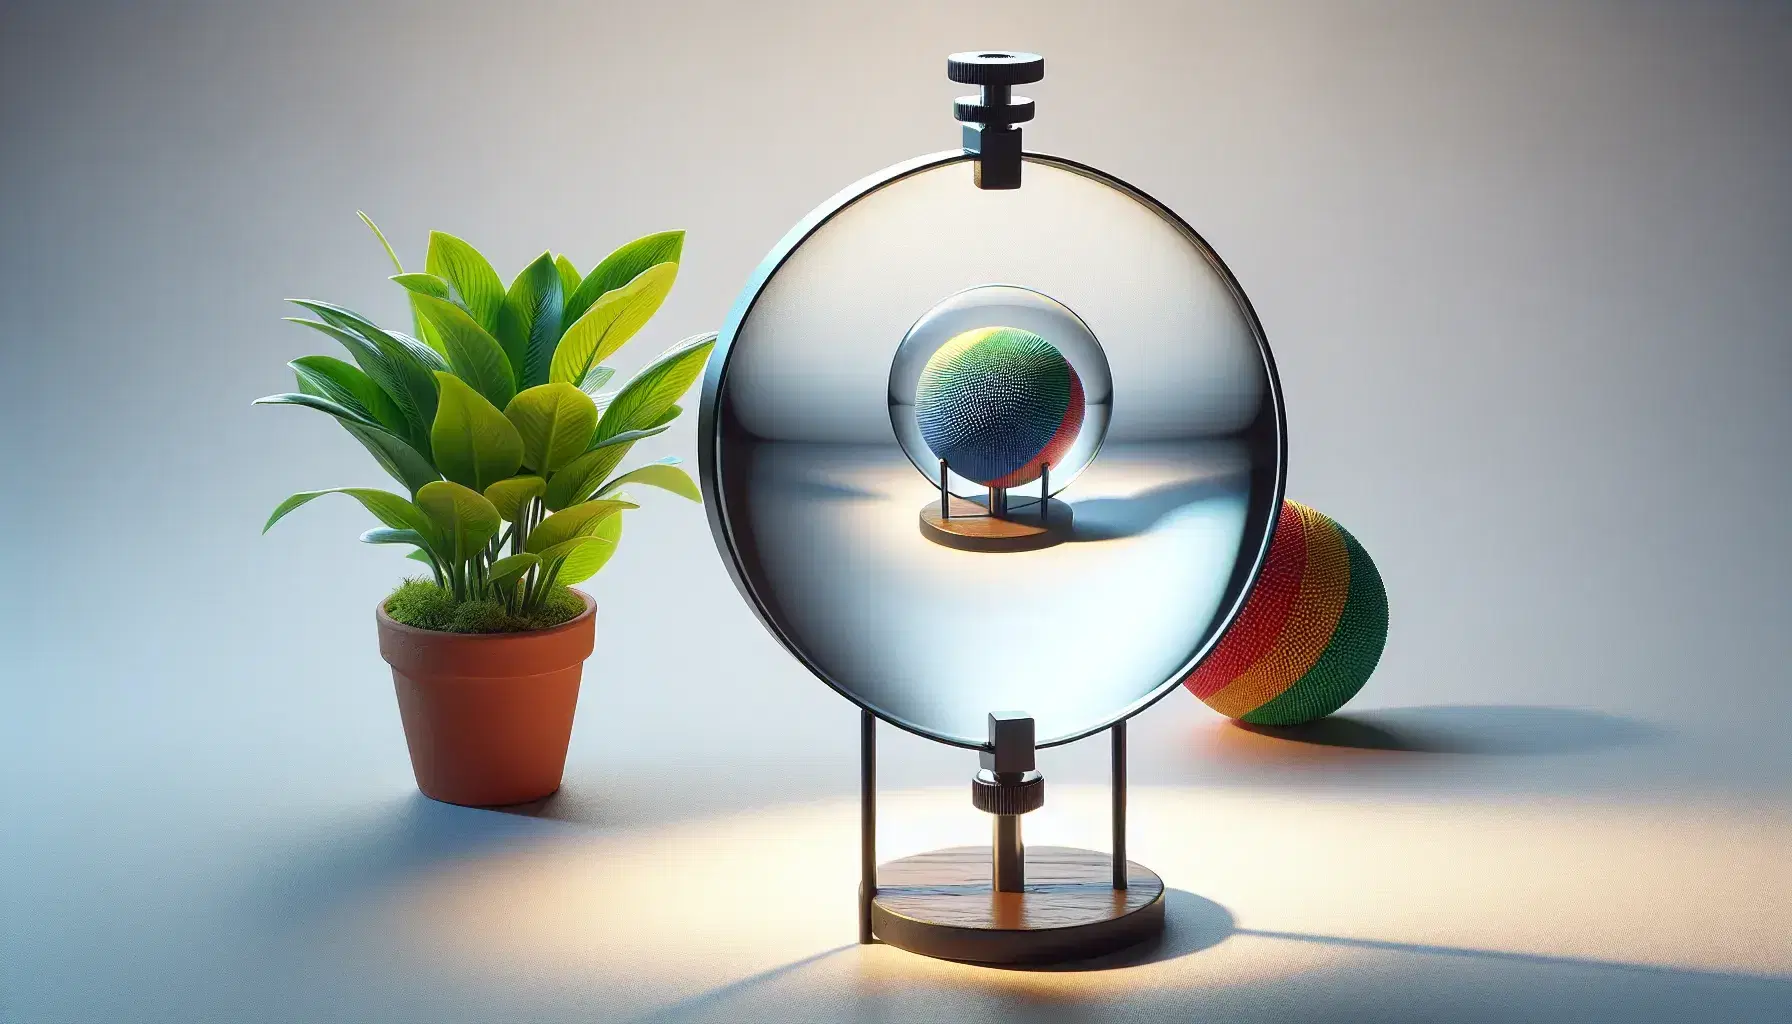 Clear glass biconvex lens on stand with inverted image of potted plant and colorful ball behind it, illustrating light refraction on a white background.